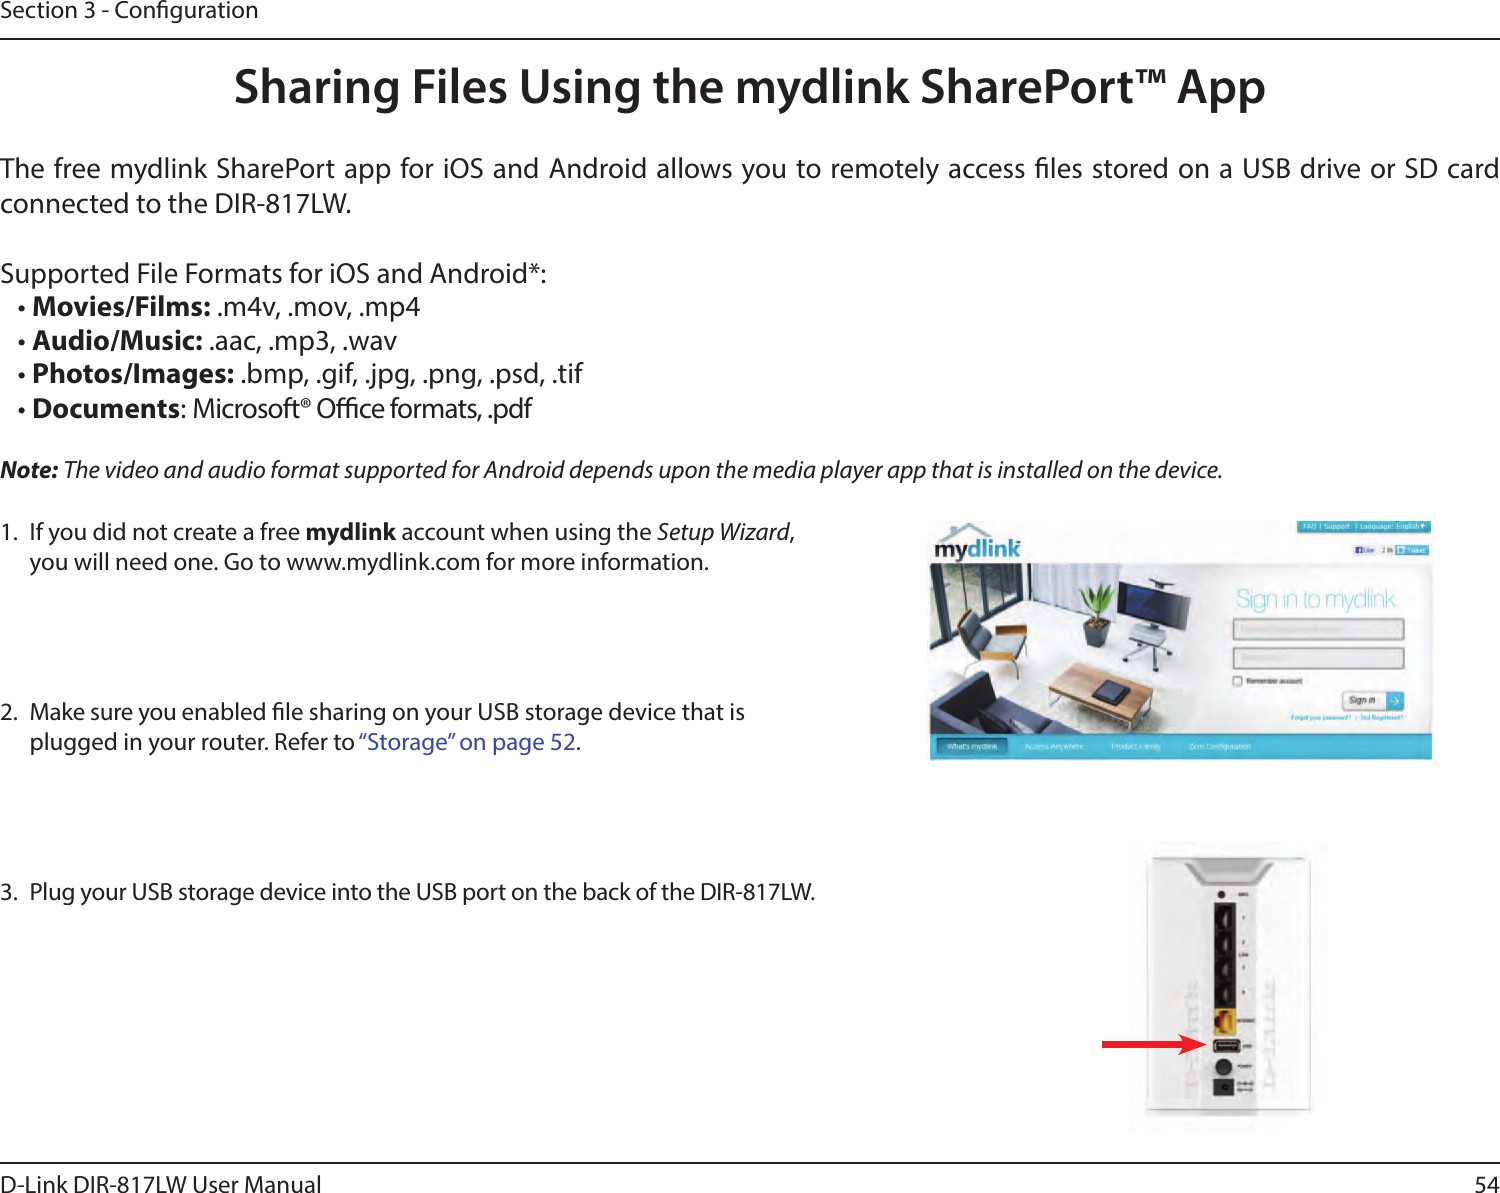 54D-Link DIR-817LW User ManualSection 3 - CongurationSharing Files Using the mydlink SharePort™ App1.  If you did not create a free mydlink account when using the Setup Wizard, you will need one. Go to www.mydlink.com for more information.2.  Make sure you enabled le sharing on your USB storage device that is plugged in your router. Refer to “Storage” on page 52.3.  Plug your USB storage device into the USB port on the back of the DIR-817LW.The free mydlink SharePort app for iOS and Android allows you to remotely access les stored on a USB drive or SD card connected to the DIR-817LW. Supported File Formats for iOS and Android*:• Movies/Films: .m4v, .mov, .mp4• Audio/Music: .aac, .mp3, .wav• Photos/Images: .bmp, .gif, .jpg, .png, .psd, .tif• Documents: Microsoft® Oce formats, .pdfNote: The video and audio format supported for Android depends upon the media player app that is installed on the device. 